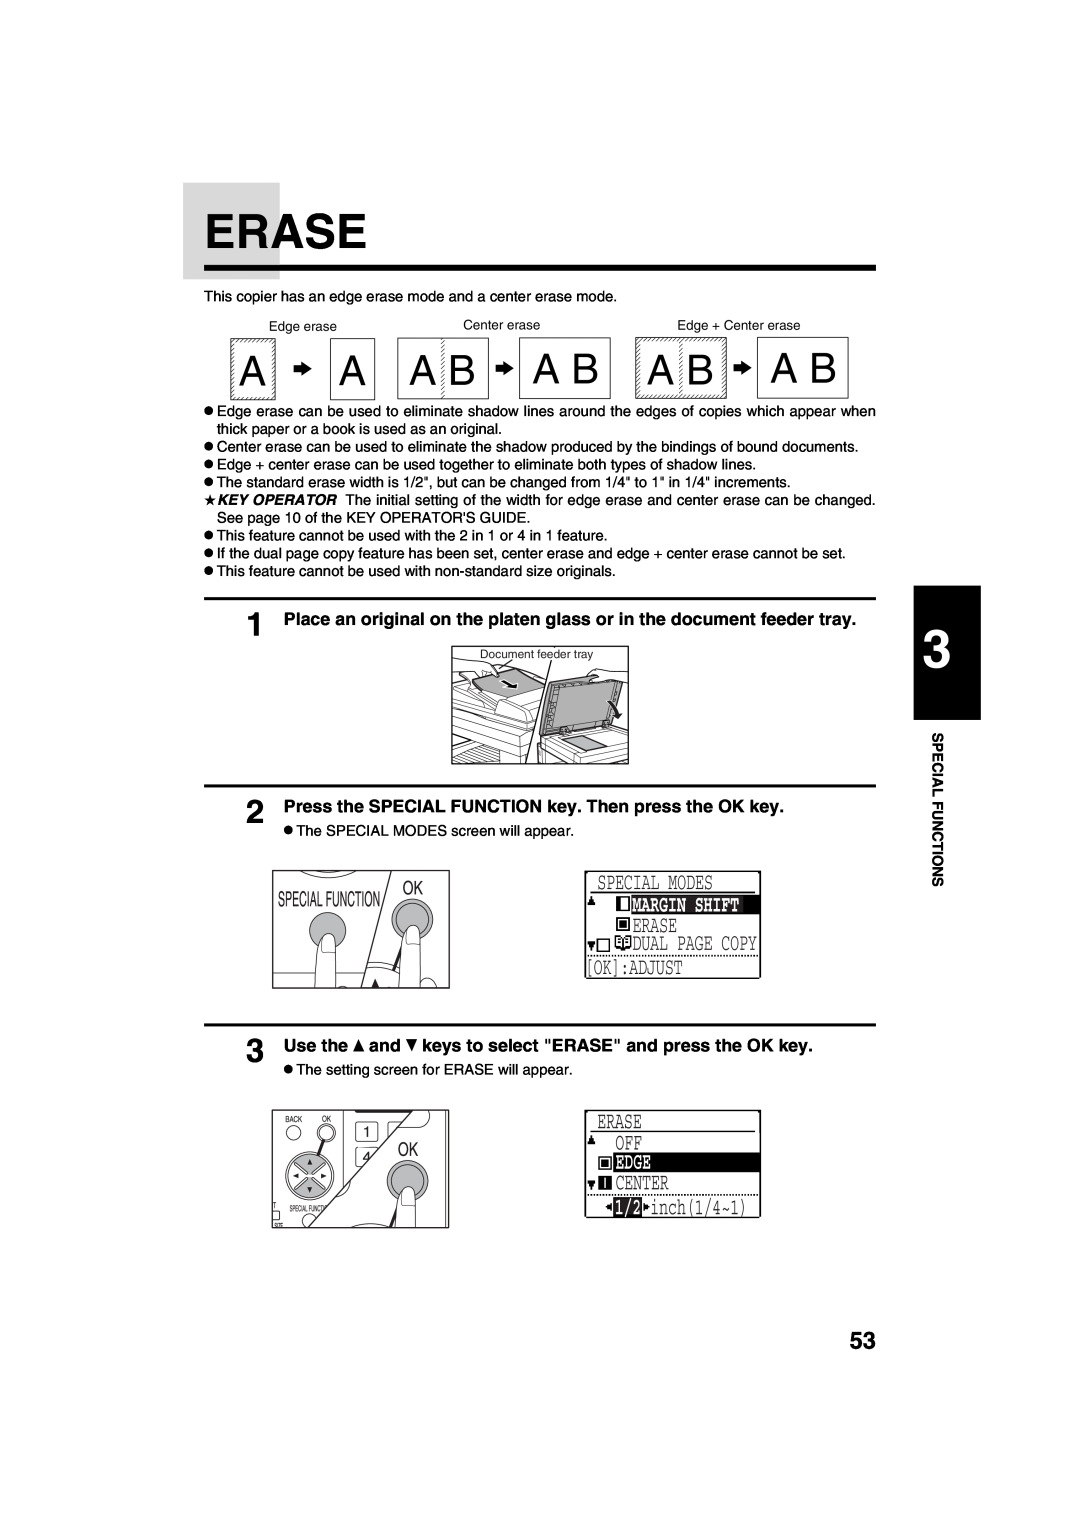 Sharp AR-M208 A B, Erase Off, Edge, CENTER 1/2 inch1/4~1, Use the and keys to select ERASE and press the OK key 